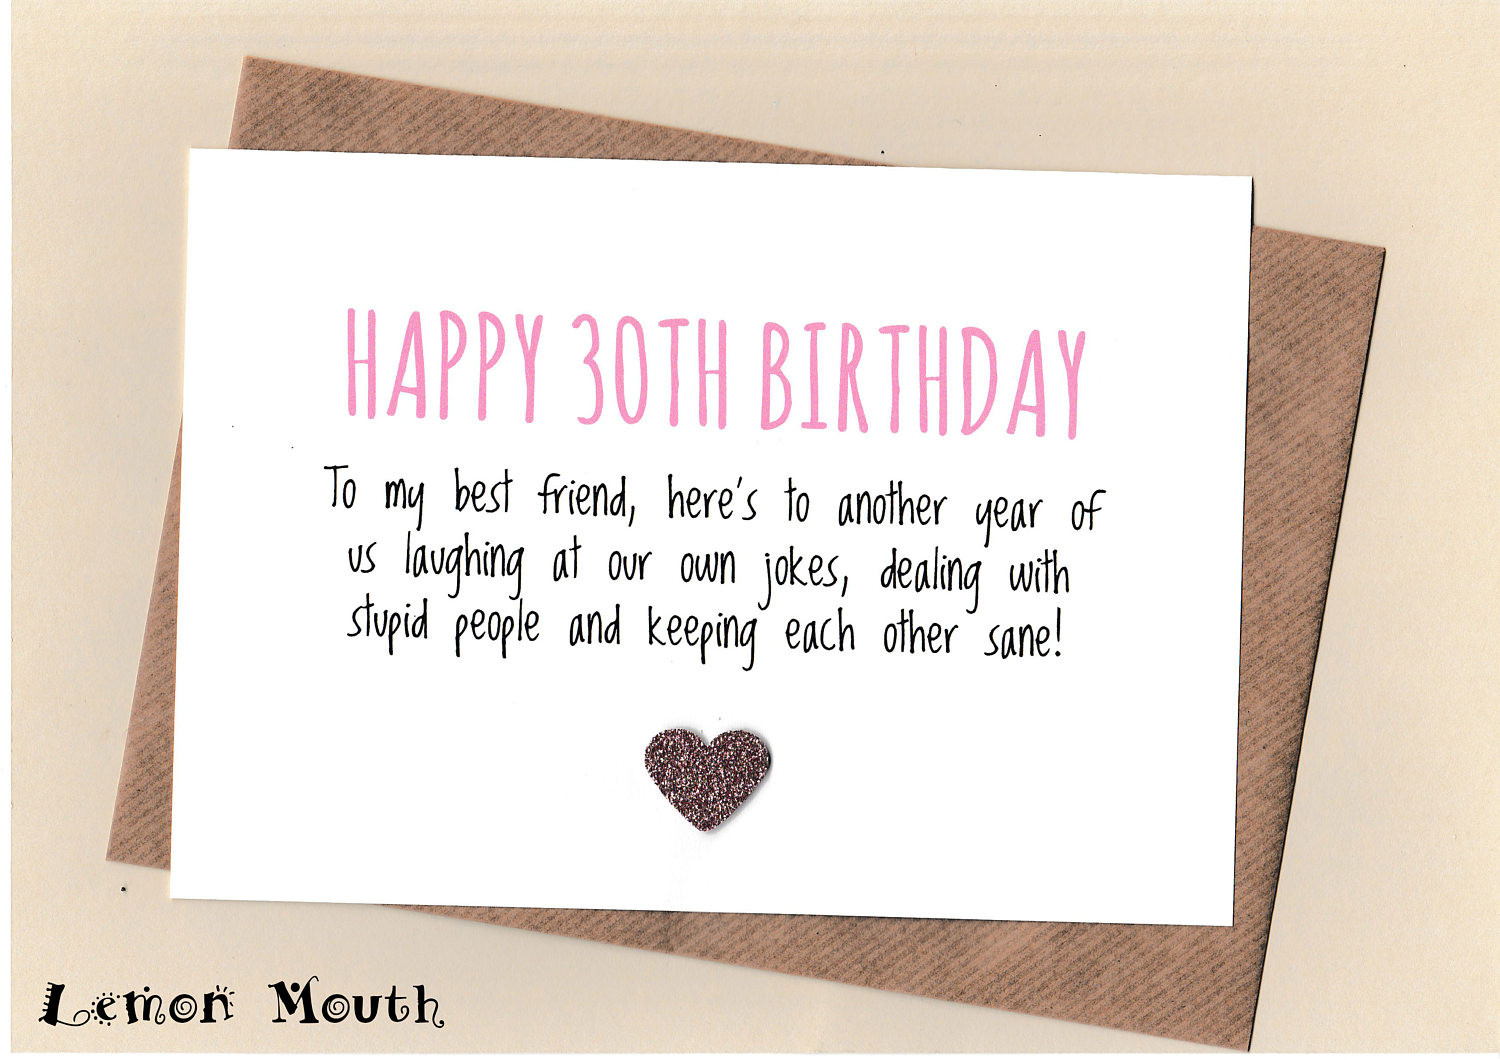 22 Of the Best Ideas for 30th Birthday Card Messages Home, Family